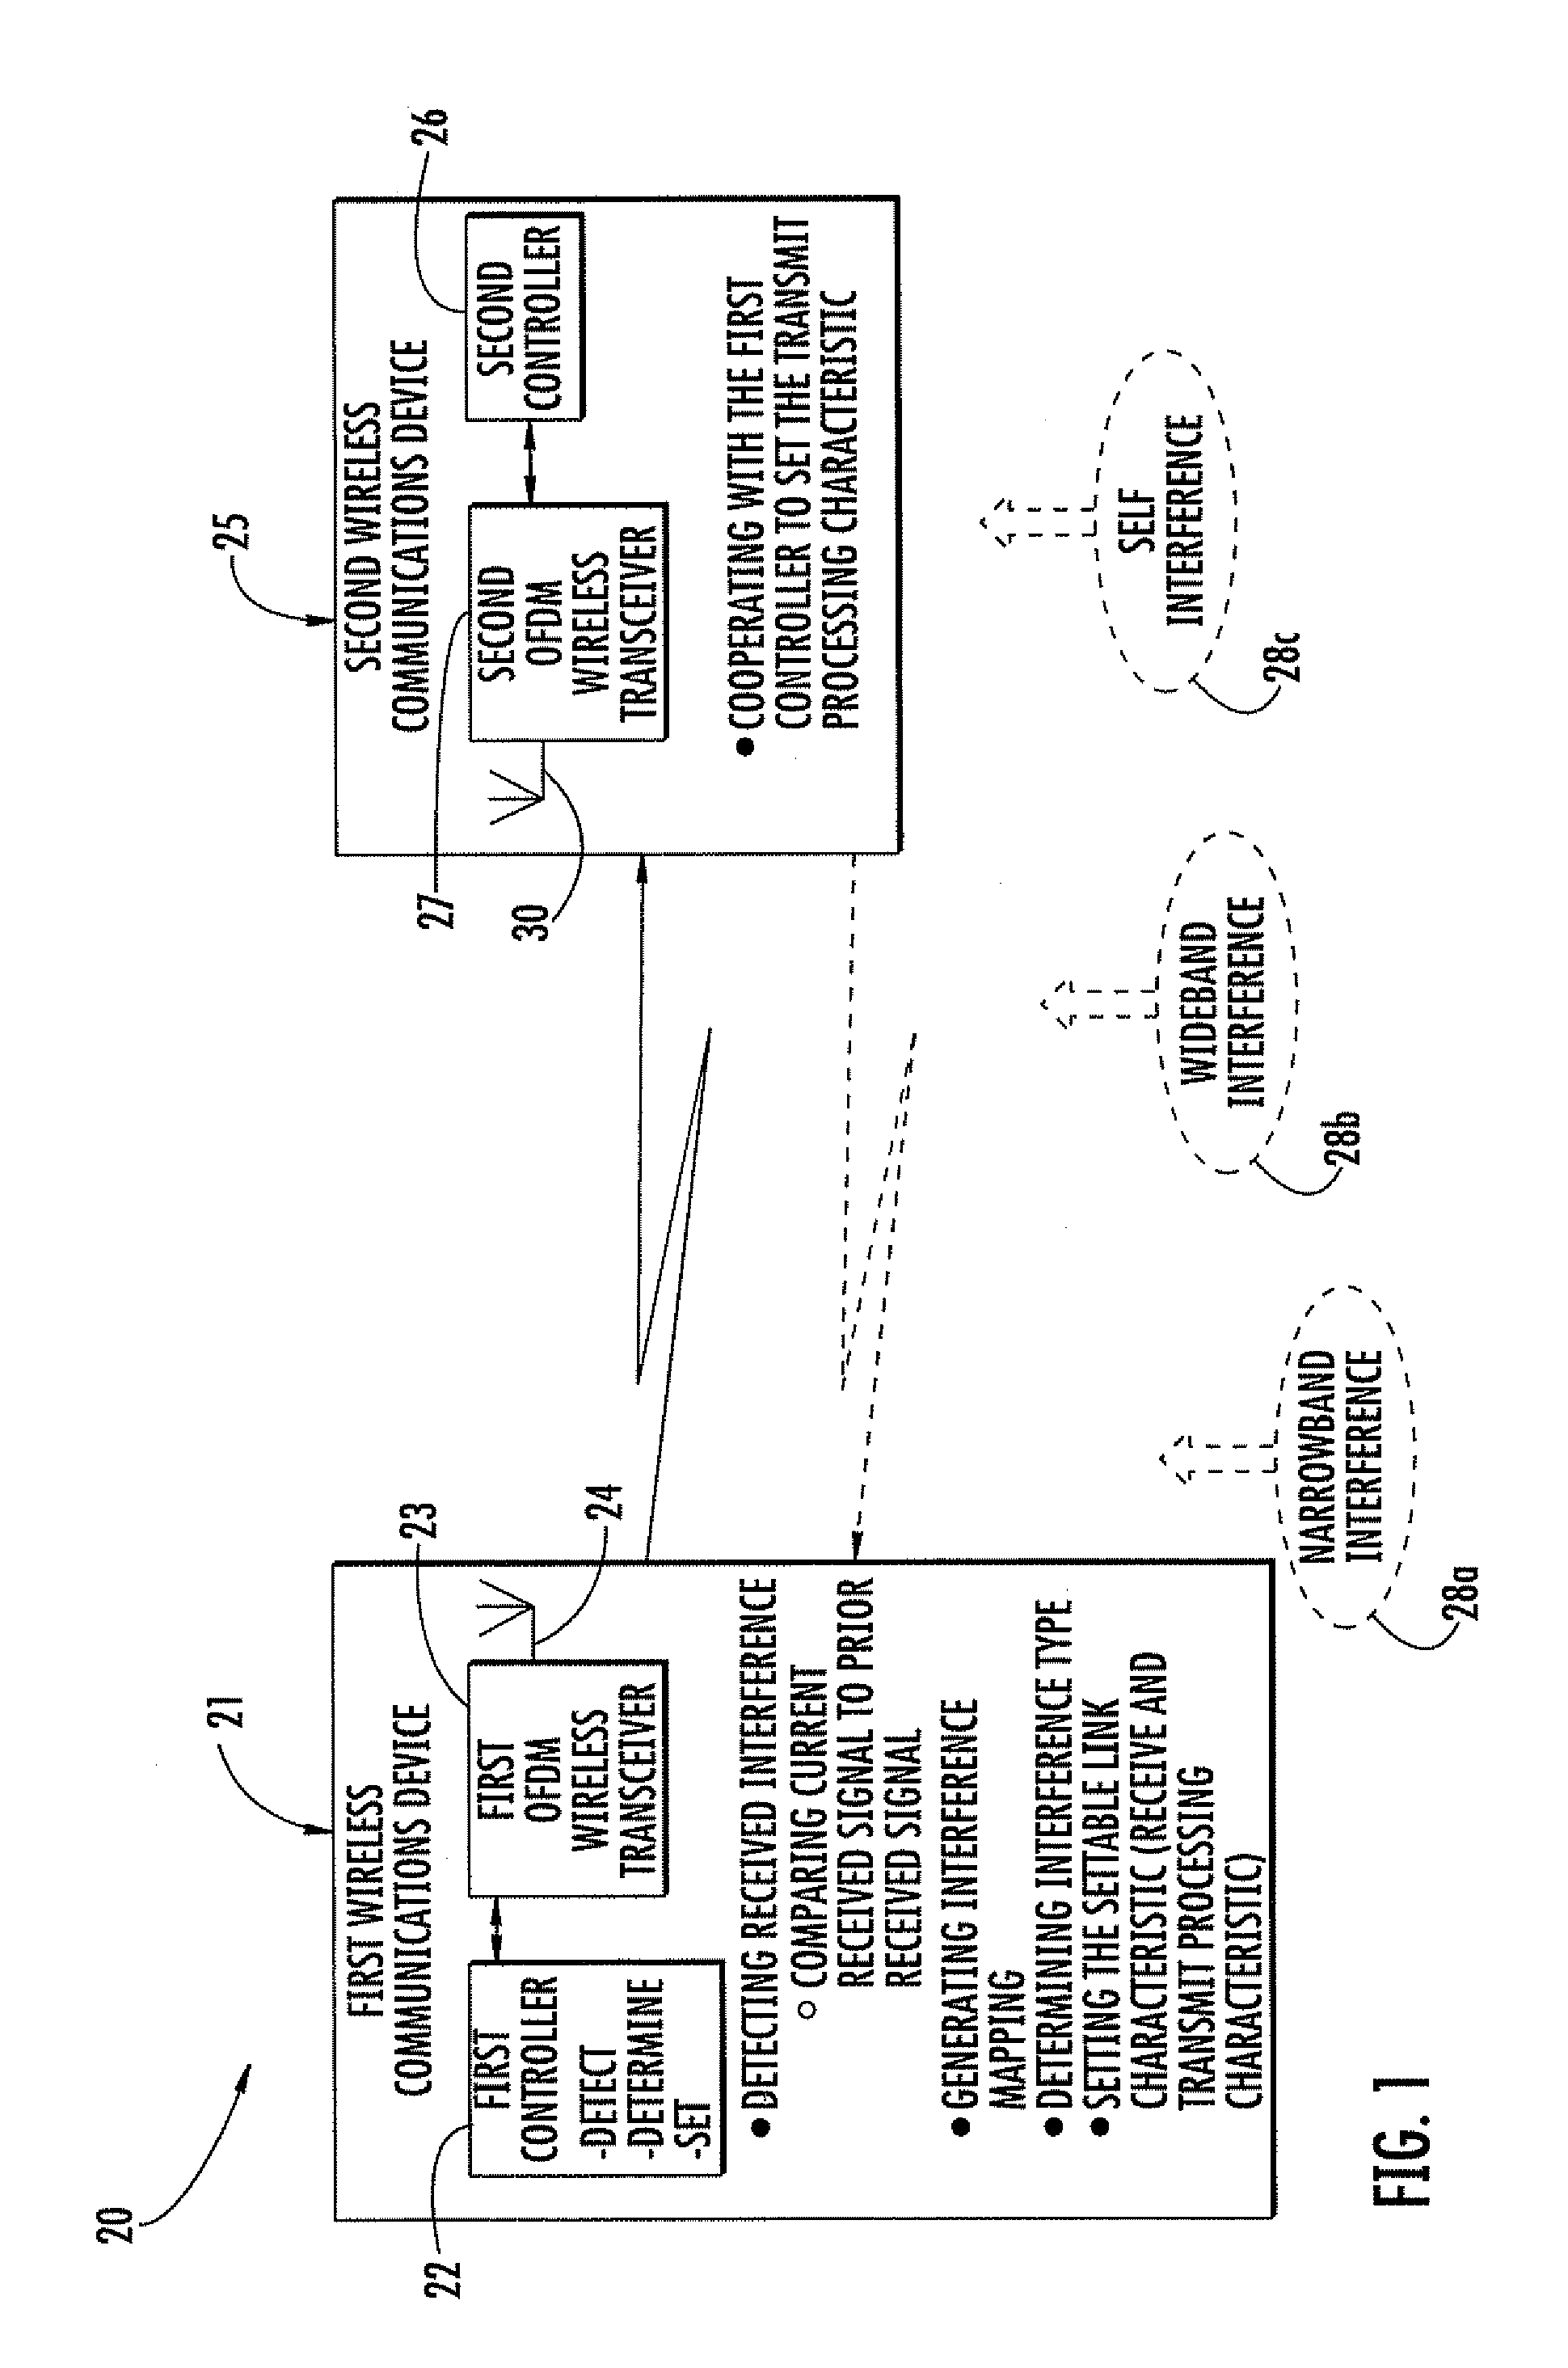 Wireless communication system compensating for interference and related methods